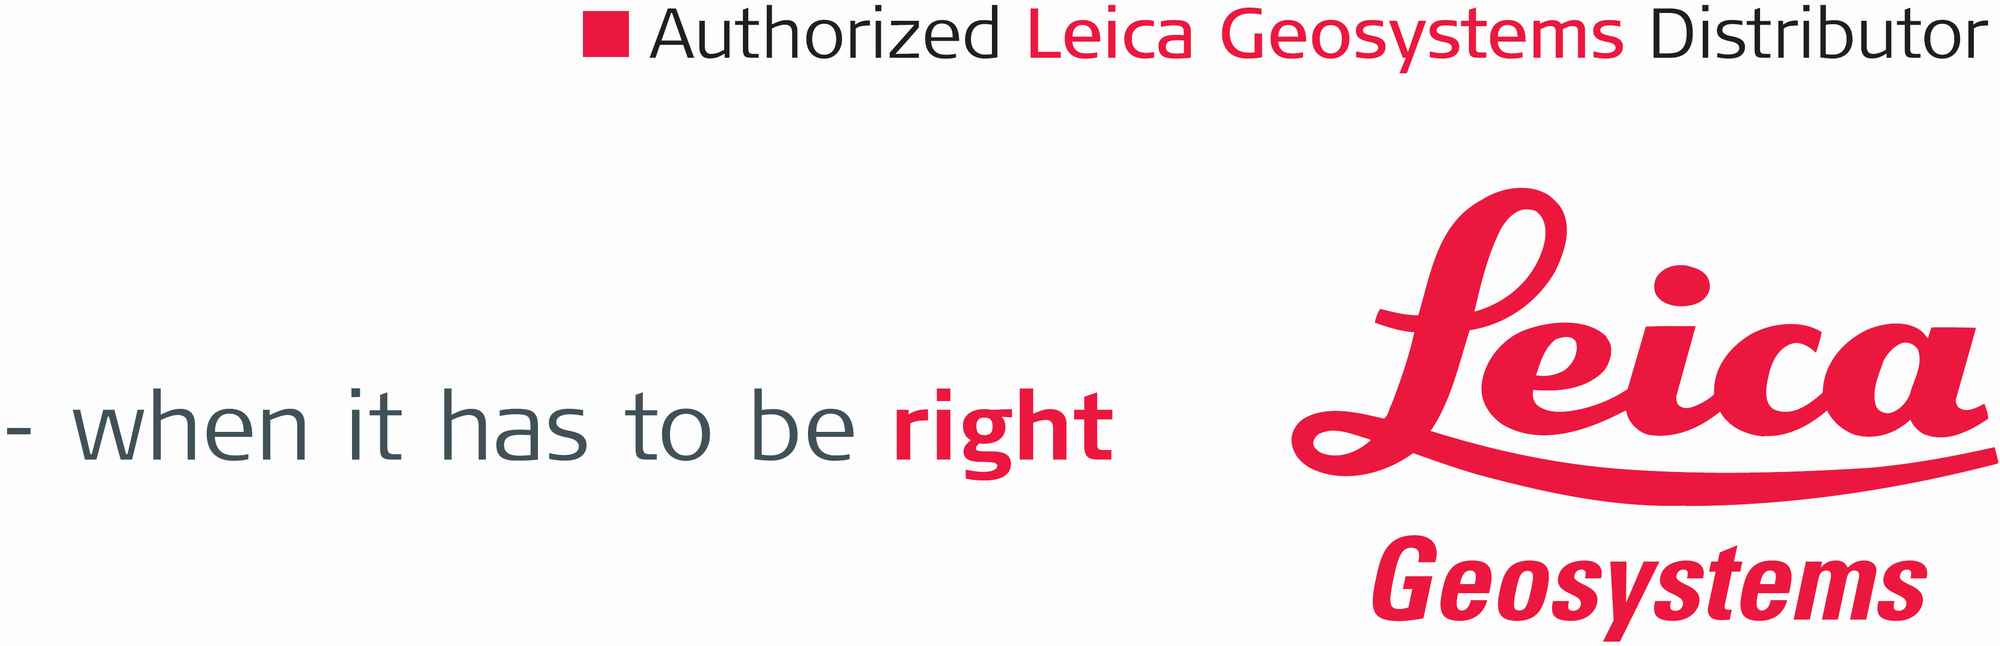 Leica Geosystems - when it has to be right